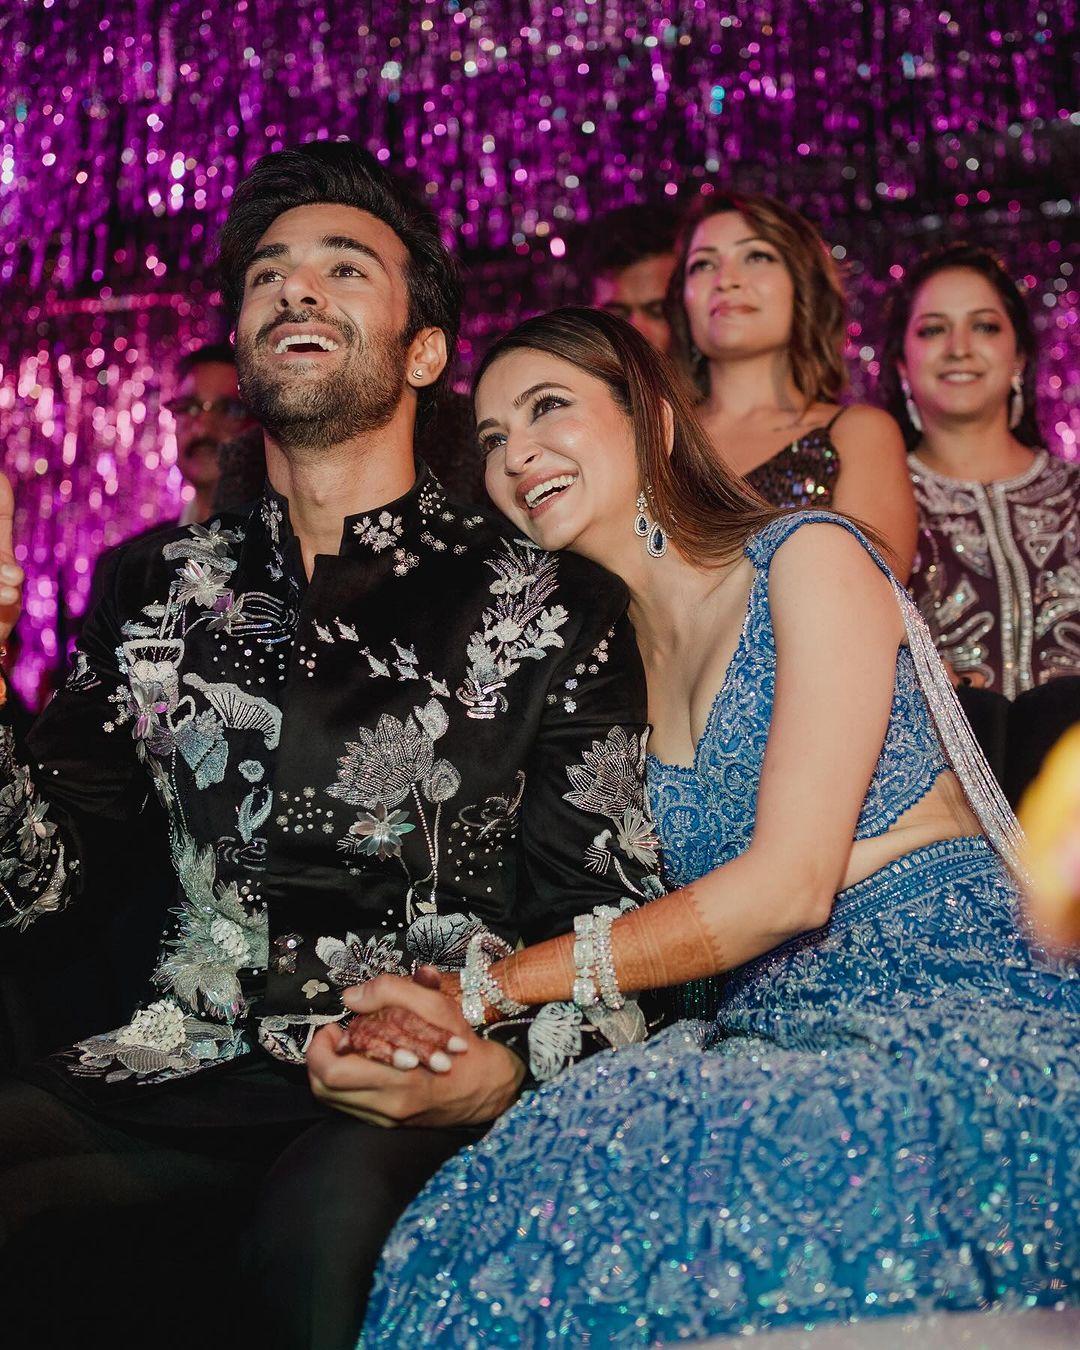 Pulkit Samrat and Kriti Kharabanda's sangeet pics are just something we can't get our eyes off from. For their Sangeet ceremony, Pulkit opted for a black decorated sherwani while Kriti wore a blue glittery lehenga